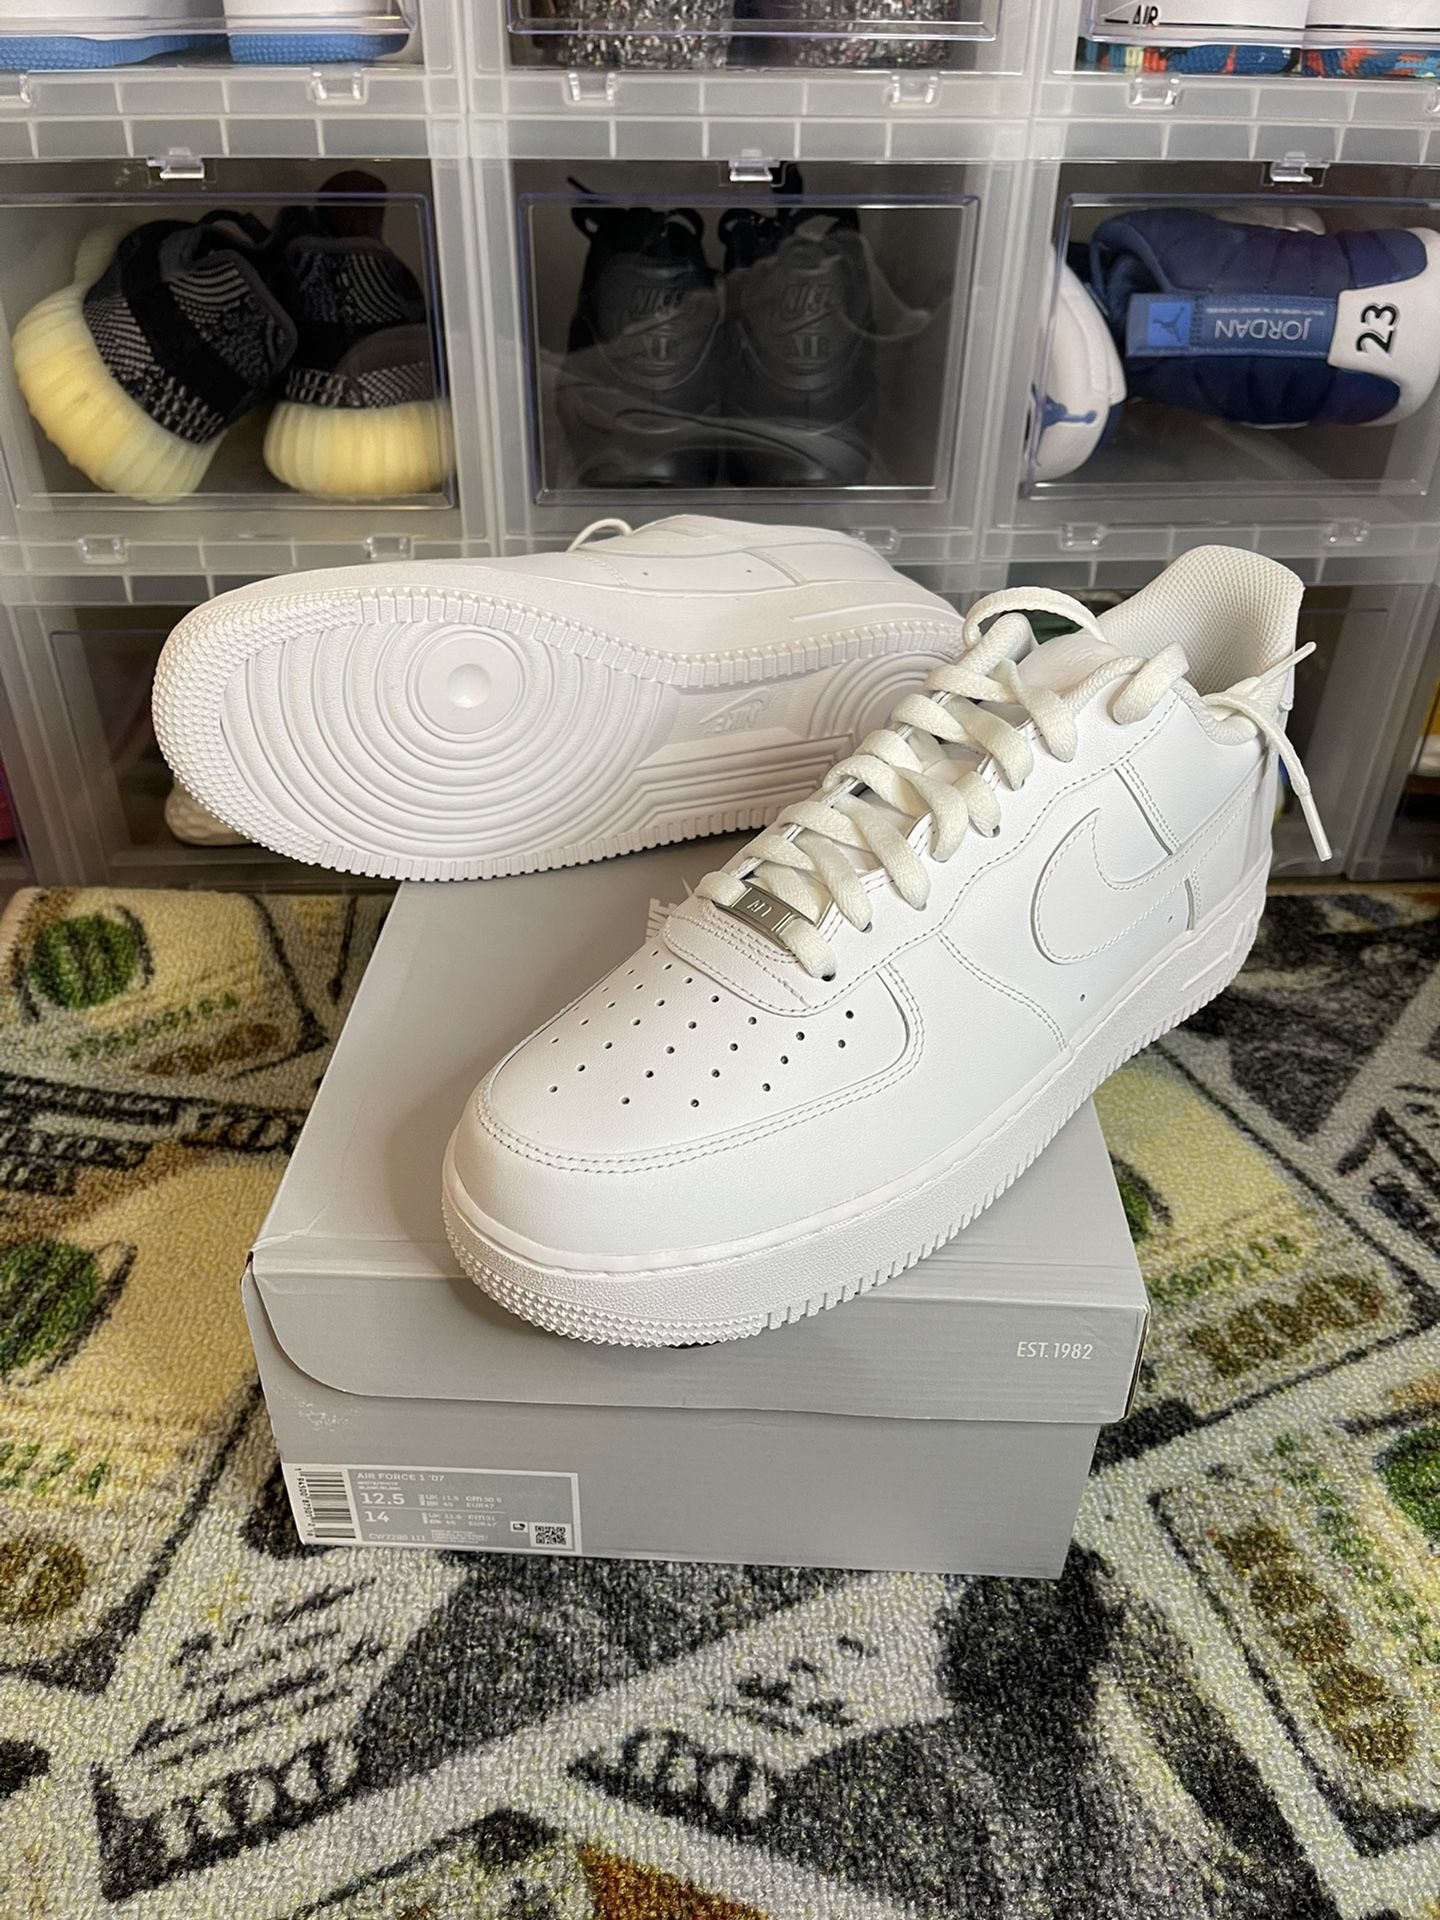 Nike Air Force 1 Men Size 9 for Sale in Newark, NJ - OfferUp